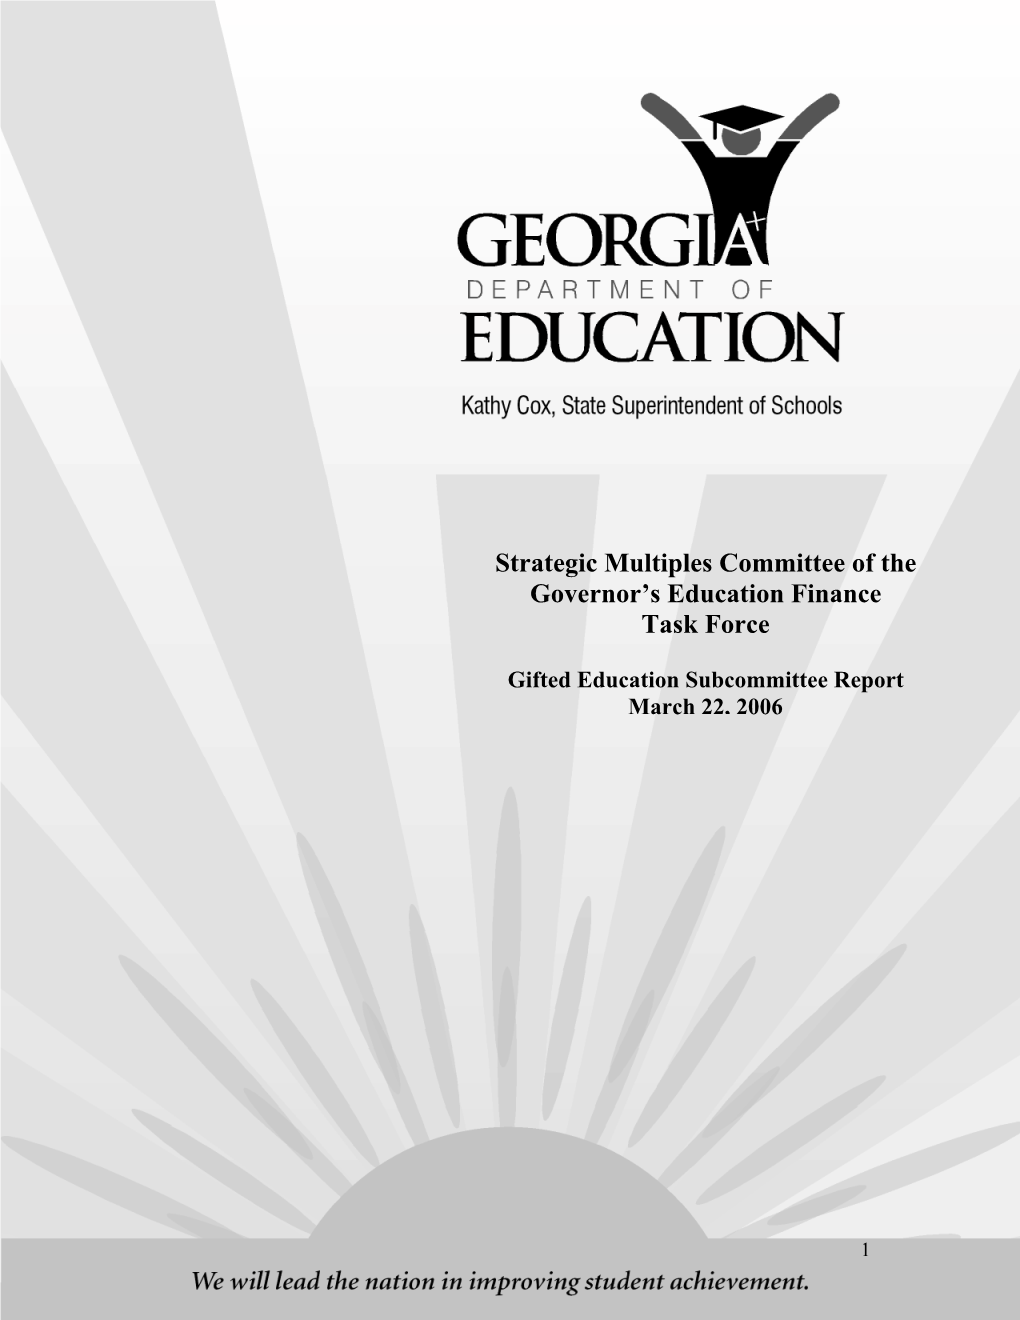 Gifted Education Subcommittee Report March 22, 2006